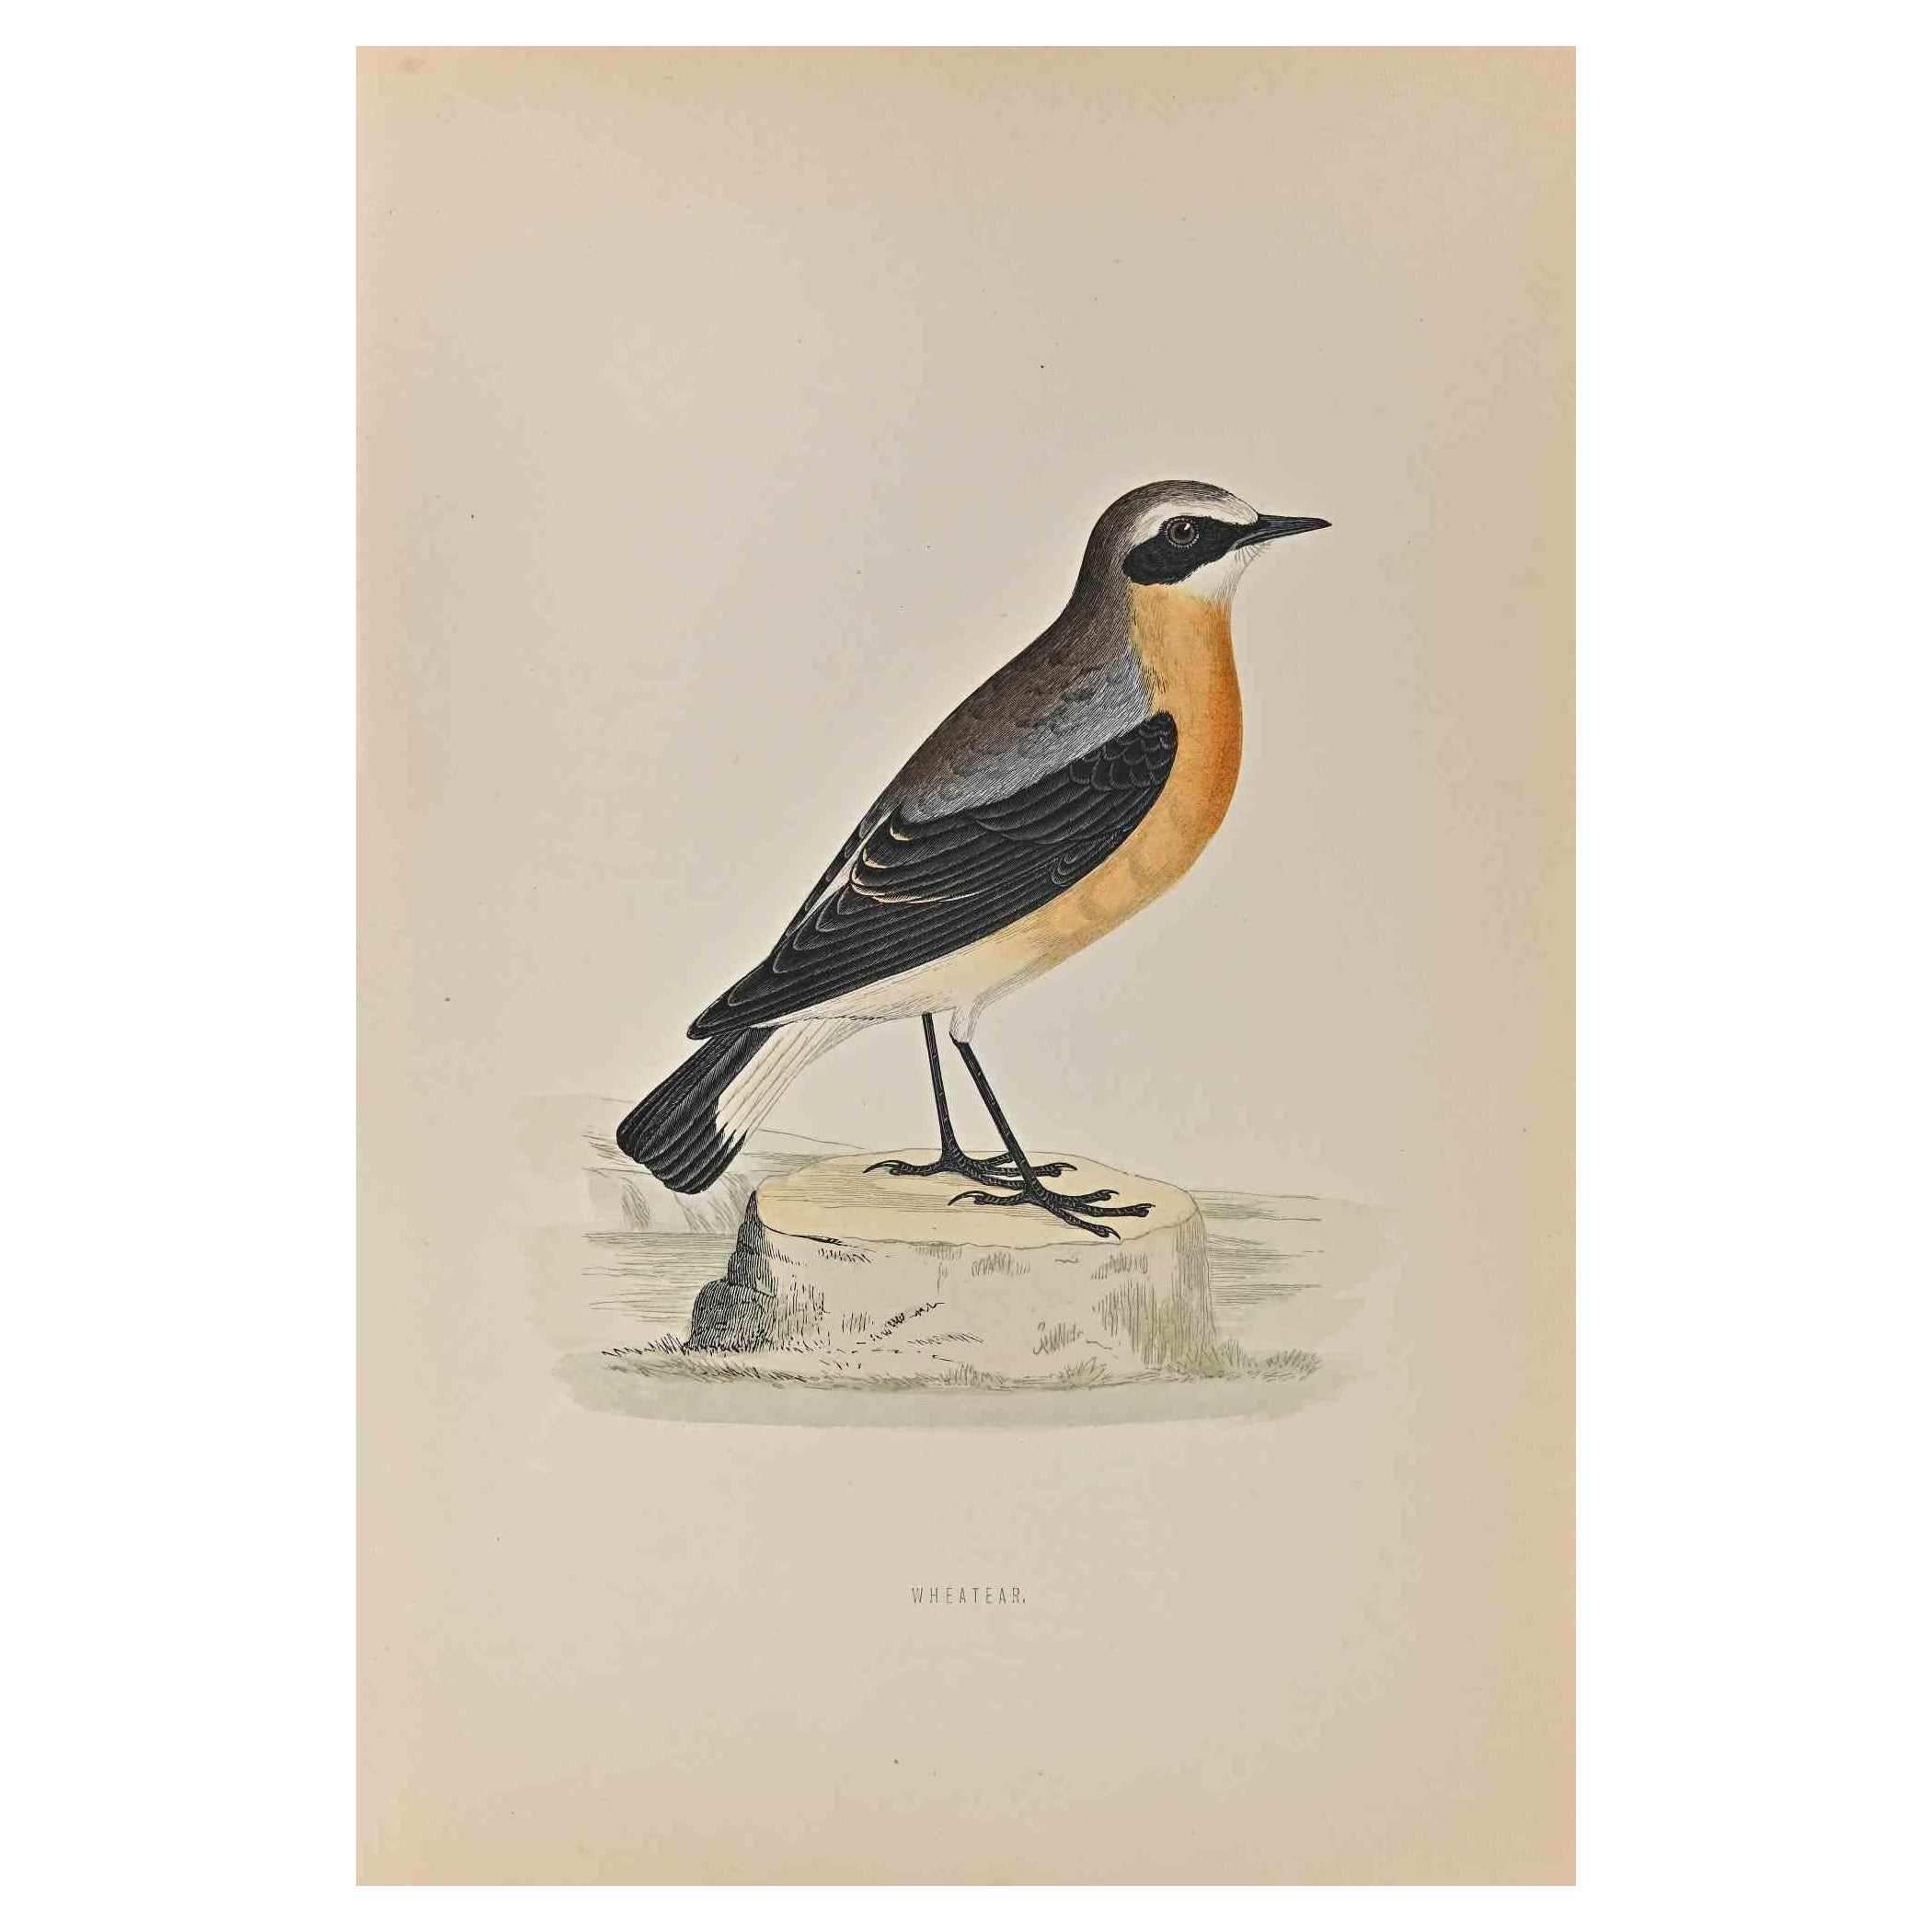  Wheatear is a modern artwork realized in 1870 by the British artist Alexander Francis Lydon (1836-1917) . 

Woodcut print, hand colored, published by London, Bell & Sons, 1870.  Name of the bird printed in plate. This work is part of a print suite